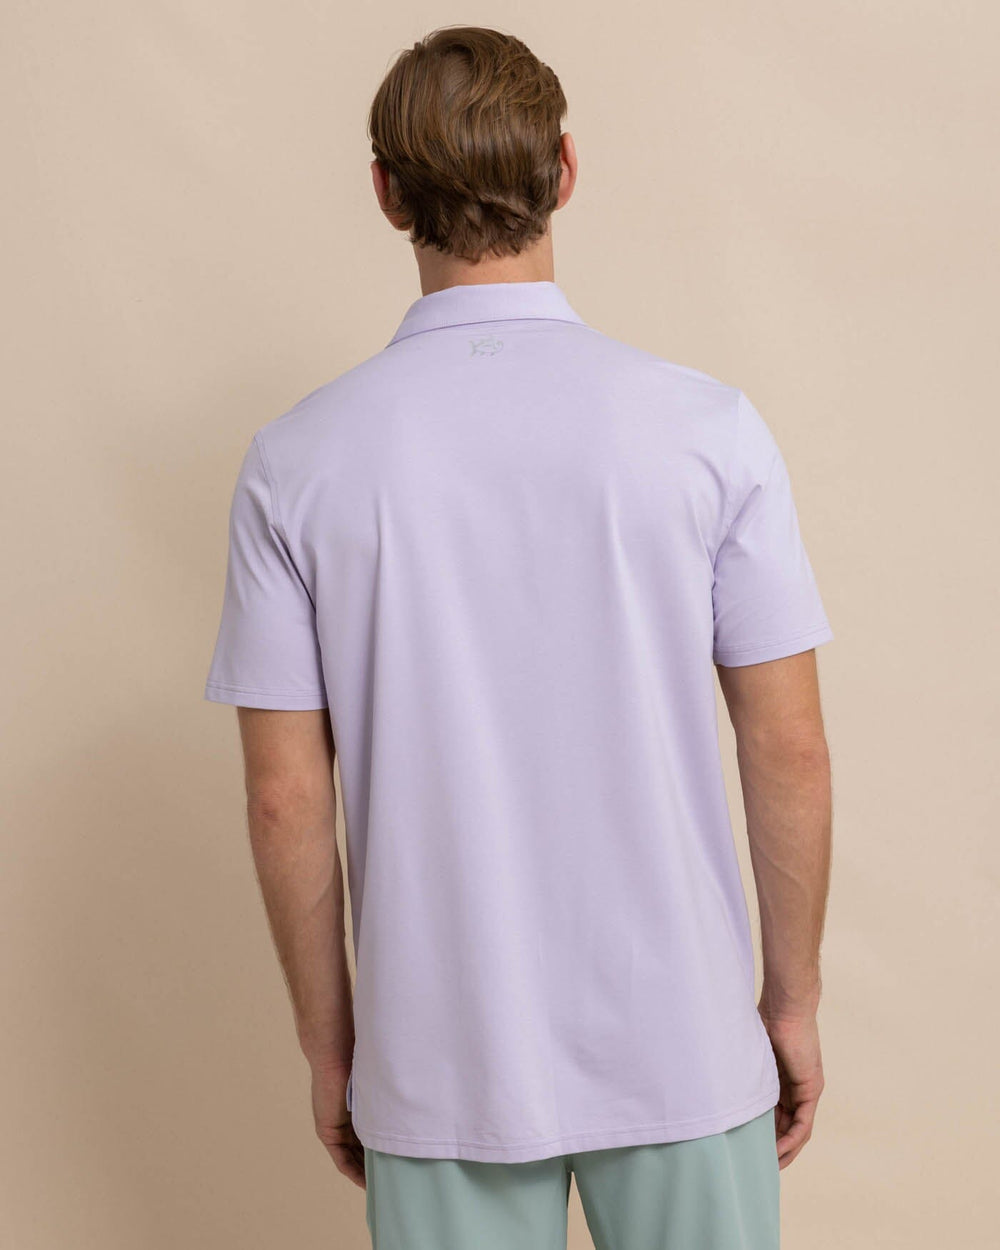 The back view of the Southern Tide brrr eeze Heather Performance Polo Shirt by Southern Tide - Heather Orchid Petal